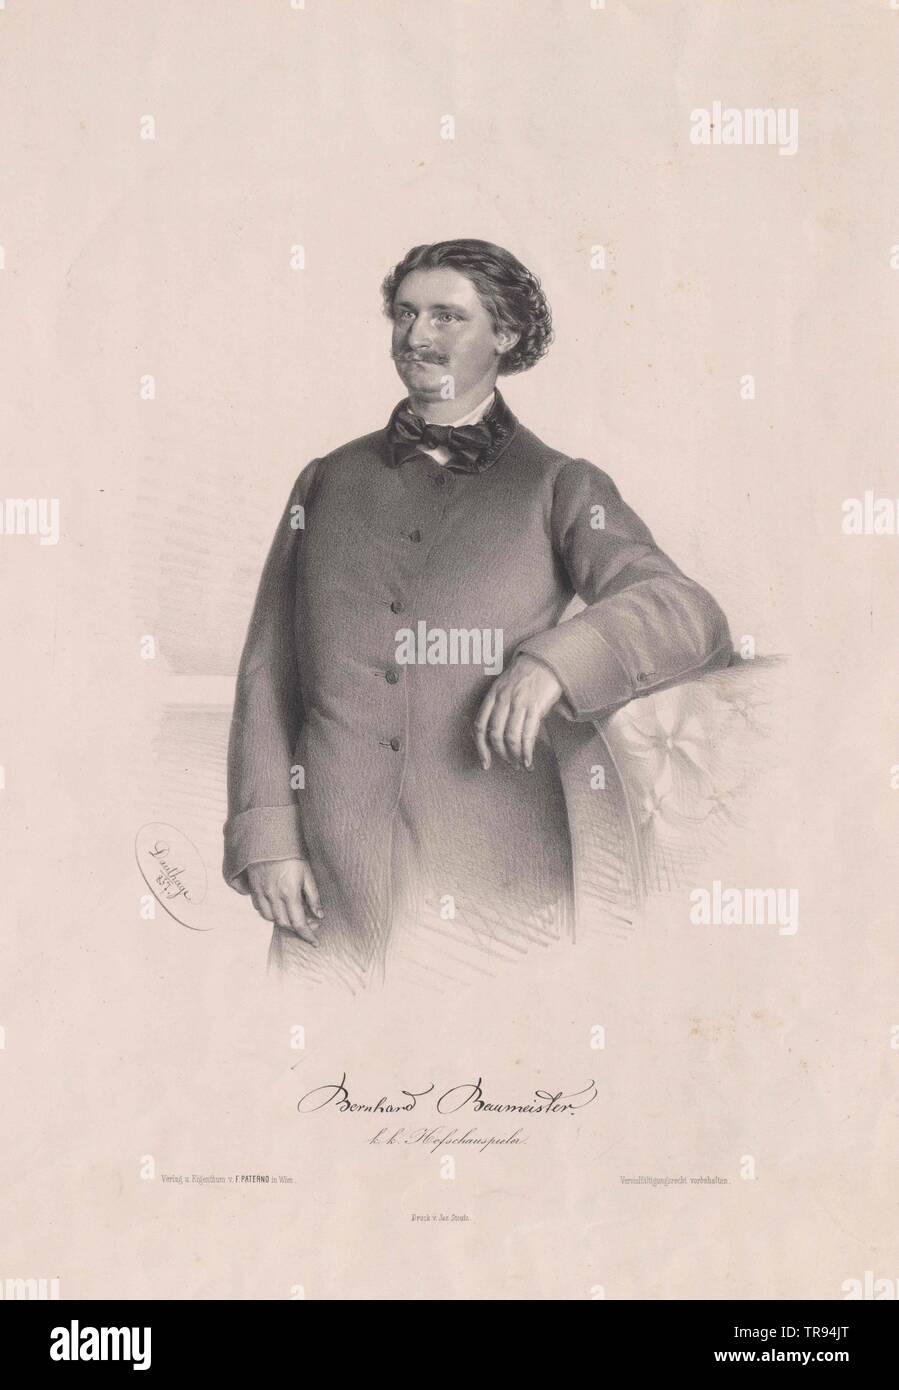 Baumeister, Bernard, actor (since 1852 at Burgtheater (Austrian National Theatre)), , Additional-Rights-Clearance-Info-Not-Available Stock Photo